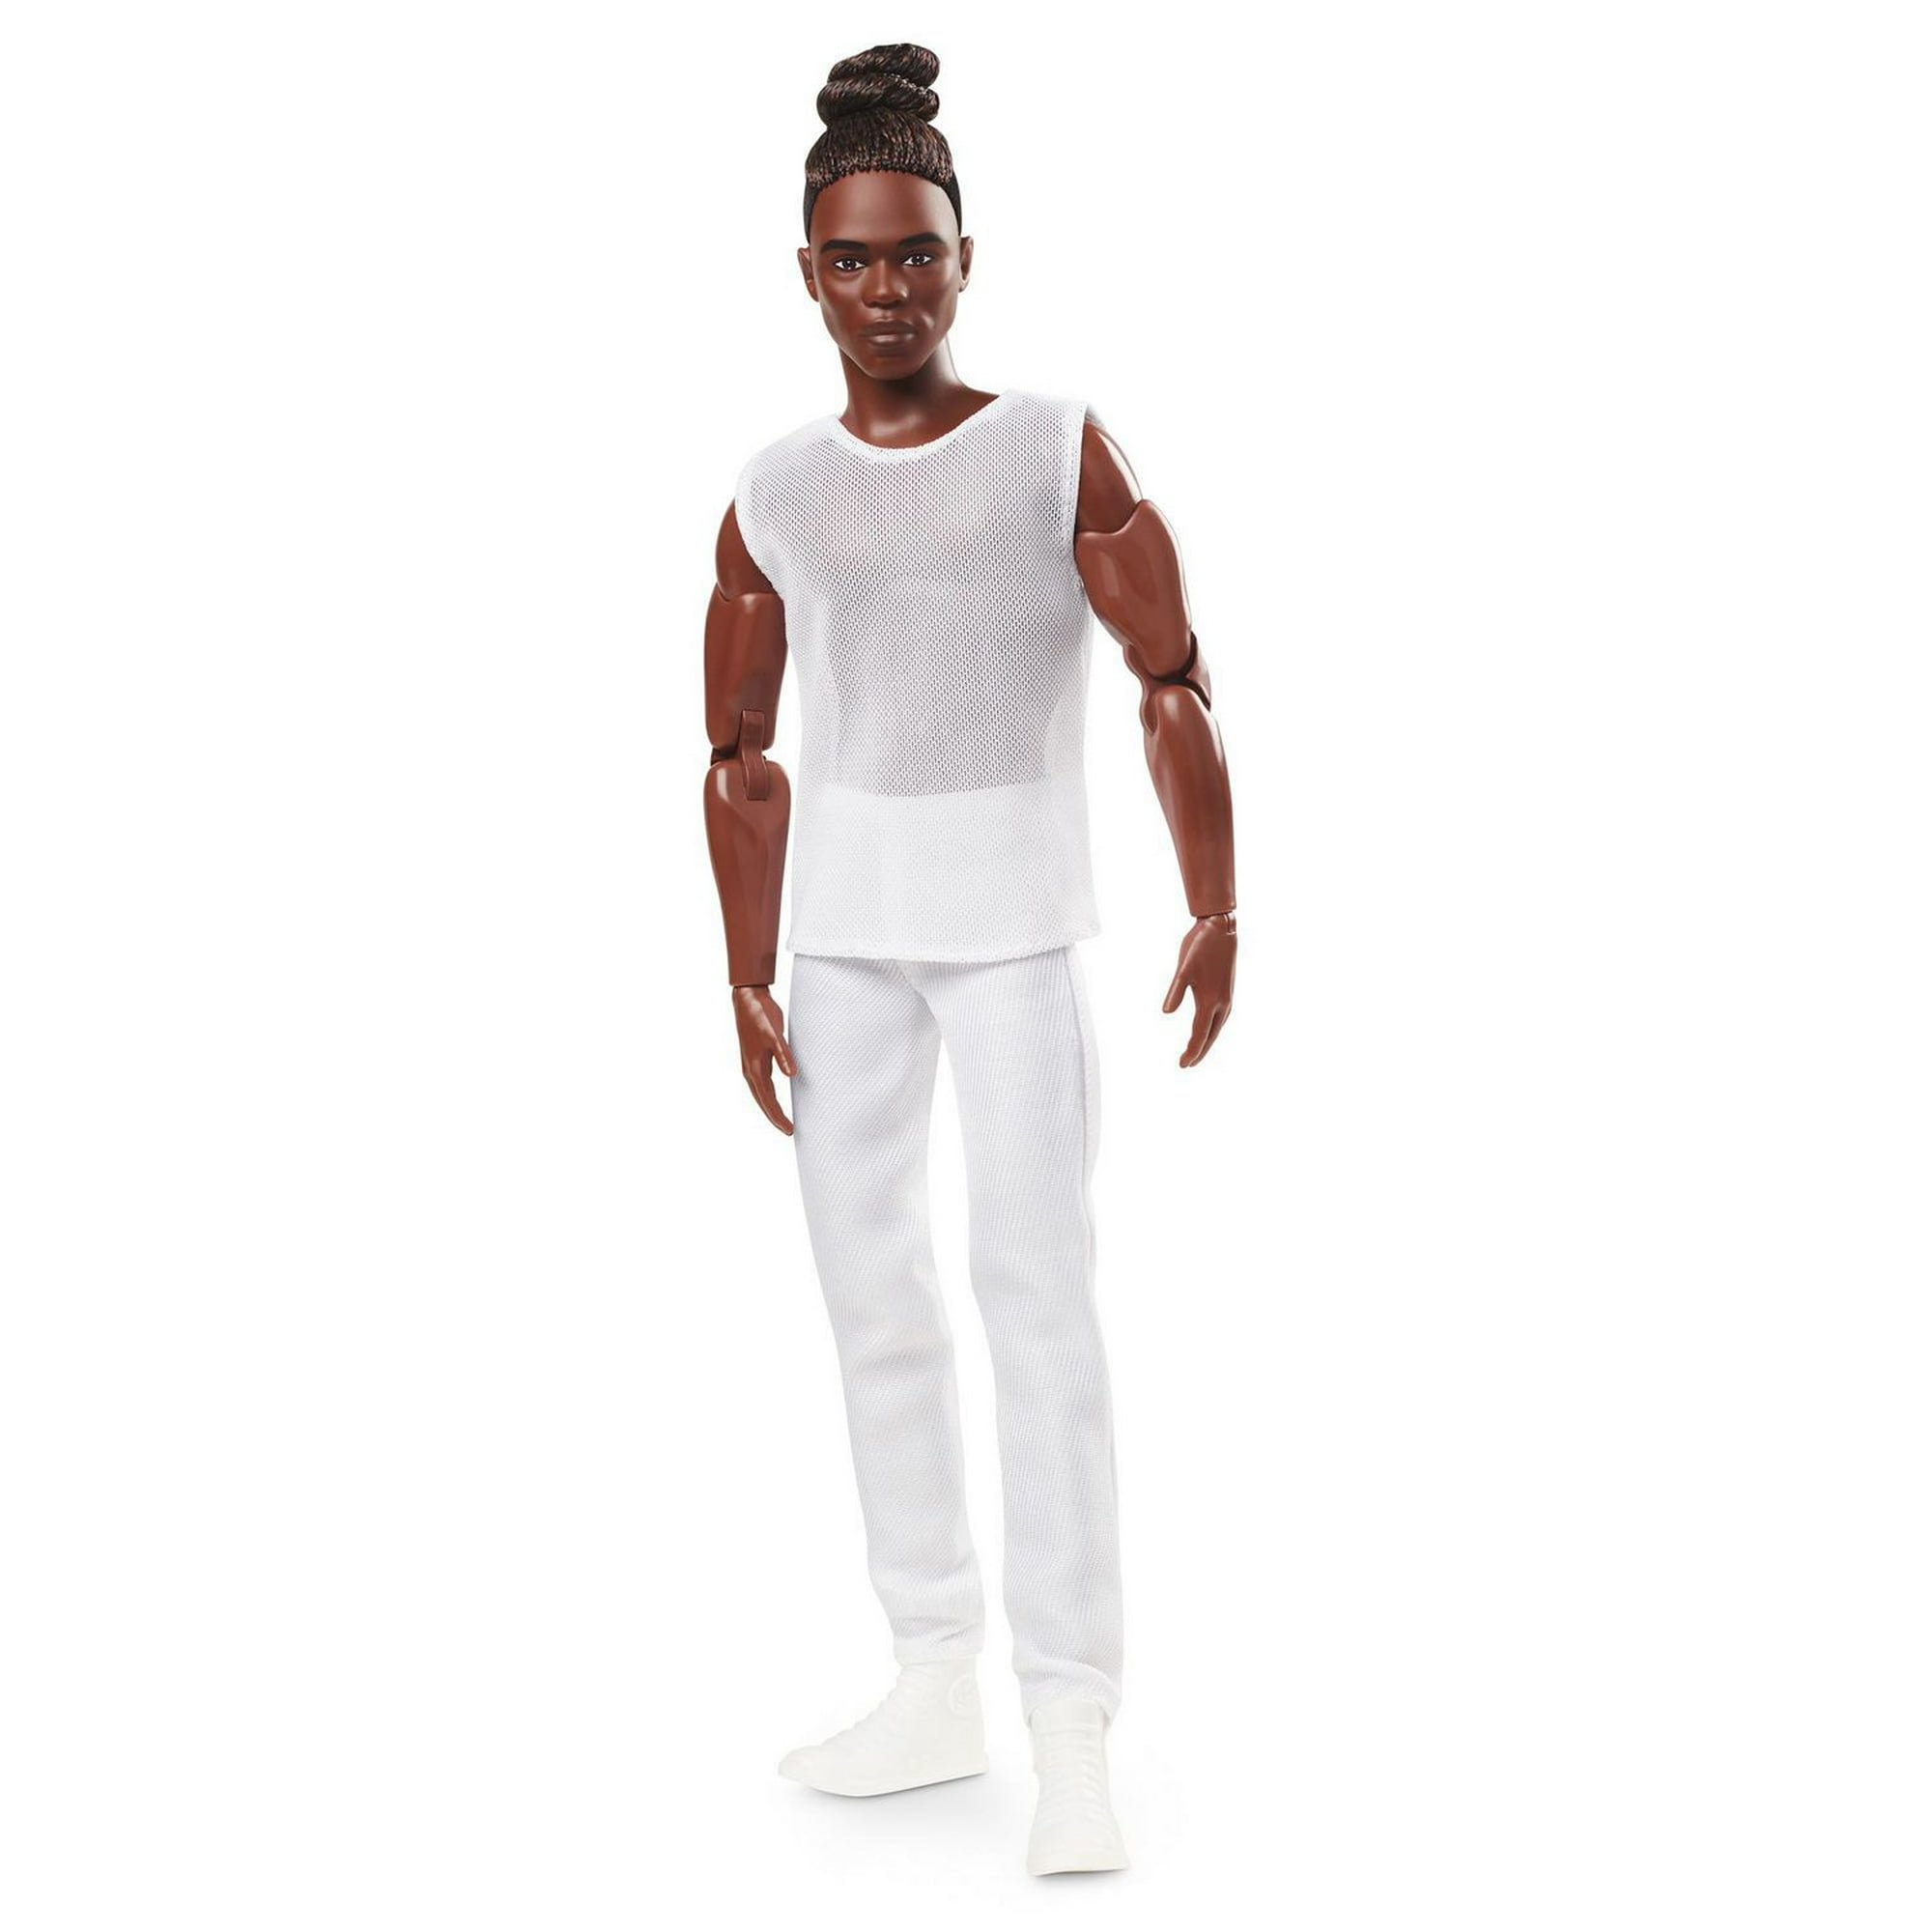 Barbie Signature Barbie Looks Ken Doll (Brunette with Braids & Bun  Hairstyle) Fully Posable Fashion Doll Wearing White Shirt & Pants 